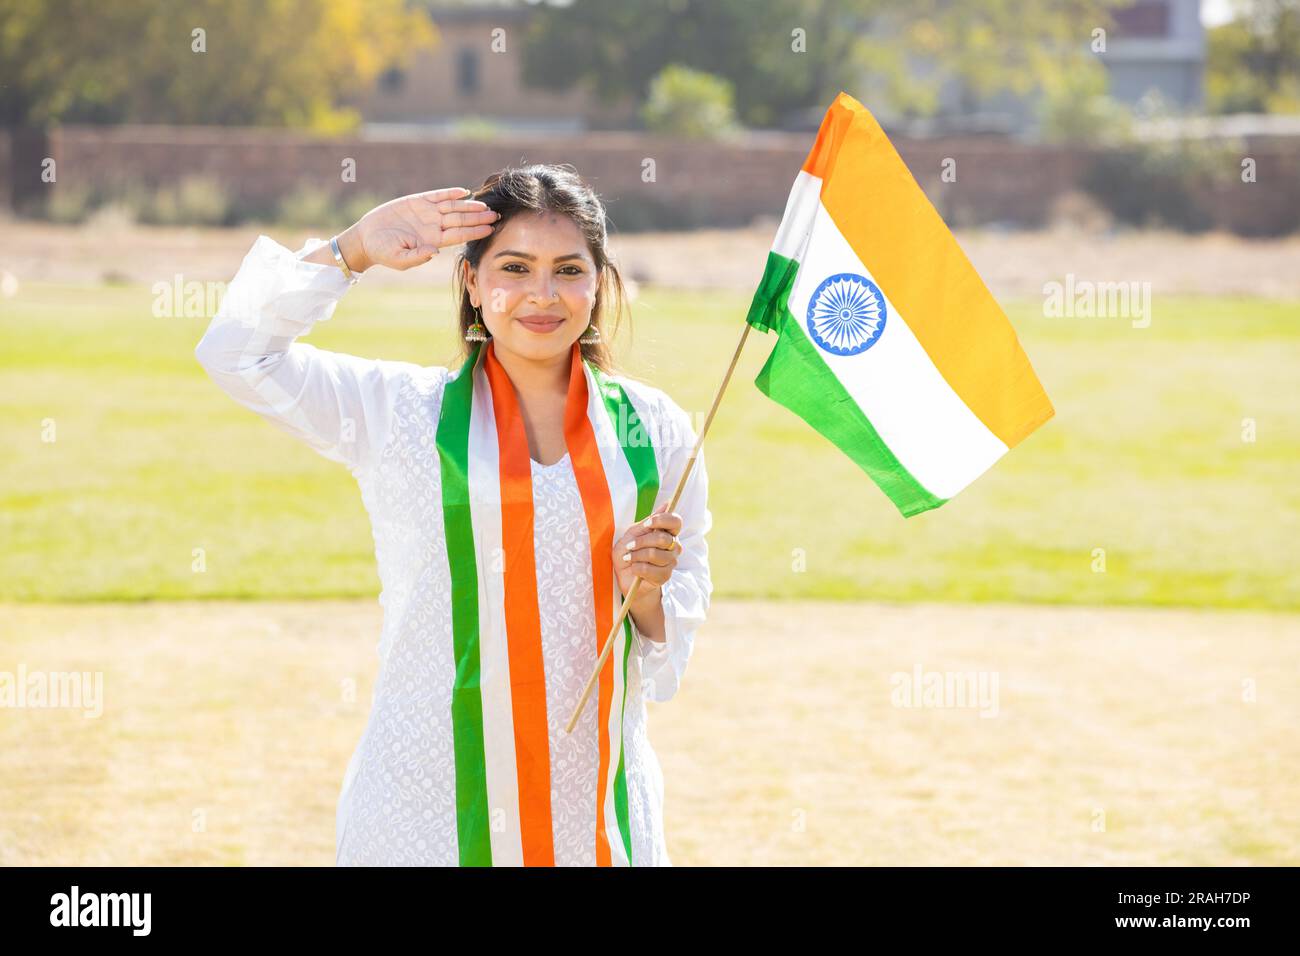 Make A Style Statement This Republic Day With These Ideas | HerZindagi